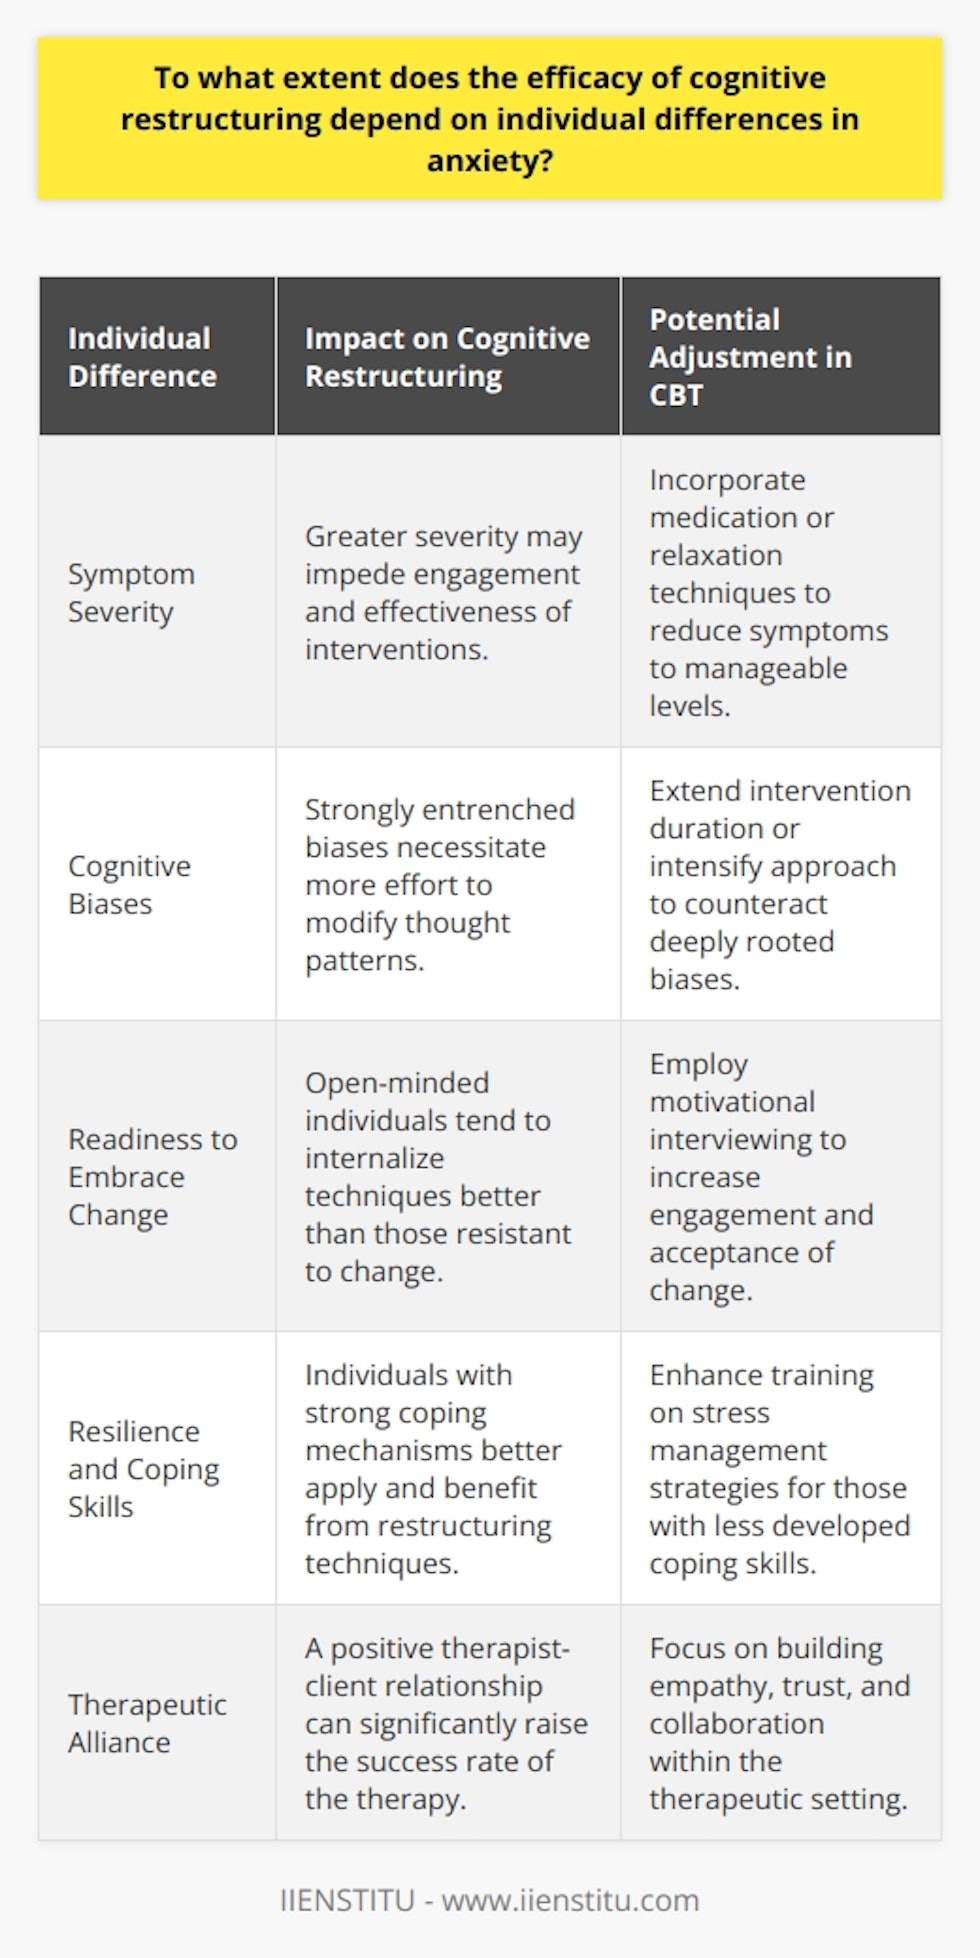 Cognitive restructuring, which forms a vital component of cognitive behavioral therapy (CBT), is widely utilized for its capacity to challenge and modify unhelpful thoughts that contribute to anxiety. The effectiveness of this technique often hinges on the variability of individual differences pertaining to anxiety. These differences can manifest across several dimensions, including symptom severity, cognitive biases, adaptability, coping mechanisms, and the therapeutic relationship, all of which can significantly influence the outcomes of cognitive restructuring.The severity of an individual's anxiety symptoms is often indicative of their ability to engage with cognitive restructuring. Those with more pronounced symptoms may find it particularly challenging to effectively employ cognitive restructuring techniques at the outset. In such instances, a blended approach that combines medications or relaxation exercises might be crucial to alleviate symptoms to a level where cognitive restructuring can take full effect.At the core of cognitive restructuring lies the individual's cognitive landscape — the biases and entrenched thought patterns that dominate their thinking. The degree of these cognitive distortions can vary significantly from person to person. Individuals with deeply entrenched negative thinking or strong confirmation biases may find it strenuous and time-consuming to adopt new, more rational and balanced thought processes. Consequently, a more intensive or prolonged intervention may be necessary for such individuals.Variance in an individual’s readiness to embrace change and to adopt new perspectives is also paramount in determining how well cognitive restructuring works. Those who are open-minded and willing to introspect and challenge their existing thought patterns generally find more success with cognitive restructuring as they are more likely to effectively internalize and apply these techniques. Conversely, individuals who exhibit resistance to change or harbor skepticism about the therapy's benefits might not achieve the same degree of improvement.Resilience and coping skills represent another area where individual differences can impact the efficacy of cognitive restructuring. Those equipped with effective stress management strategies and a resilient mindset may find it easier to apply cognitive restructuring techniques and, as a result, manage their anxiety more successfully. In contrast, those who lack such skills may struggle to make the most out of cognitive restructuring without additional training in coping strategies.A fundamental aspect that can influence the effectiveness of cognitive restructuring is the therapeutic alliance — the relationship of trust and understanding between the therapist and the client. A strong alliance characterized by empathy, collaboration, and mutual respect fosters a supportive environment where individuals feel more comfortable confronting and reworking their thought patterns. Consequently, such a therapeutic milieu can considerably enhance the success rate of cognitive restructuring.In summary, the variability in anxiety-related individual differences significantly influences the outcome of cognitive restructuring. It’s incumbent upon mental health professionals to recognize and adjust for these individual traits and circumstances. Customization of treatment, which might include integrating supplementary strategies, addressing cognitive biases, leveraging individual strengths such as resilience, and nurturing a robust therapeutic alliance, can maximize the benefits individuals derive from cognitive restructuring. Identifying and understanding these nuances paves the way for more personalized and effective interventions in managing anxiety disorders.